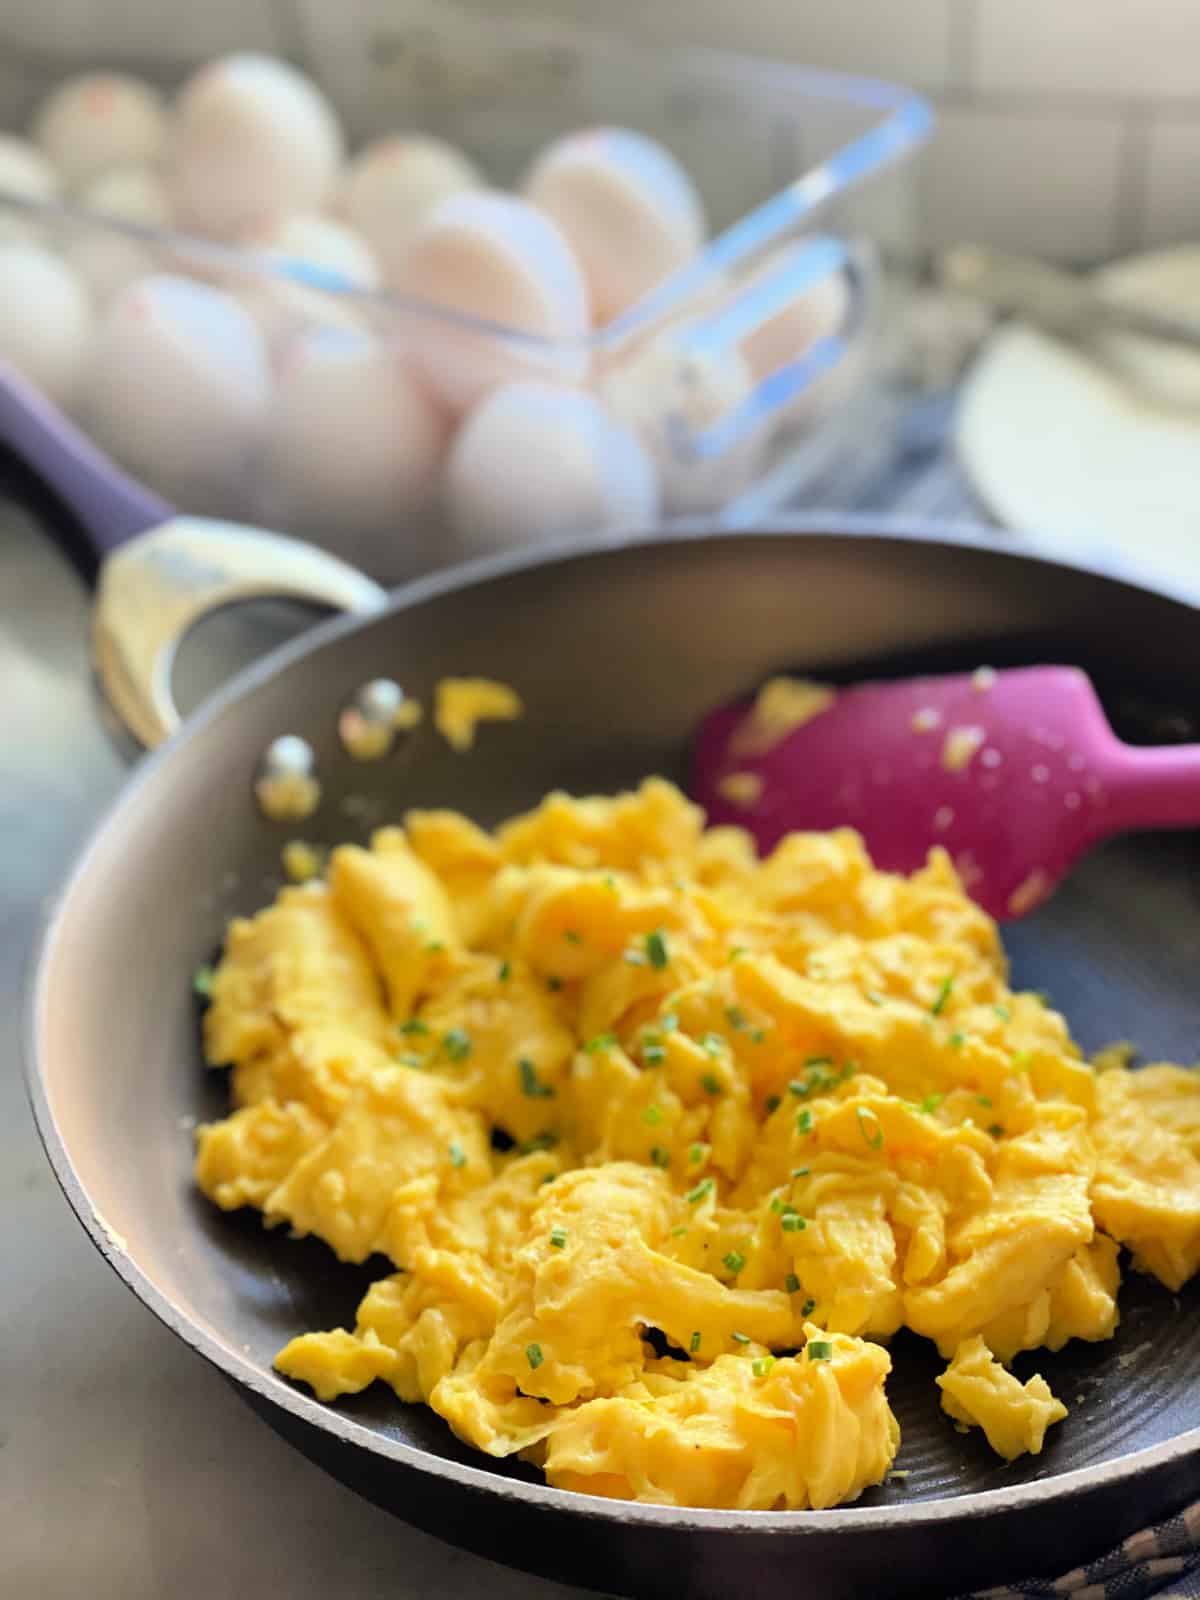 Brown frying pan with fluffy scrambled eggs topped with chives on a blue and white striped cloth